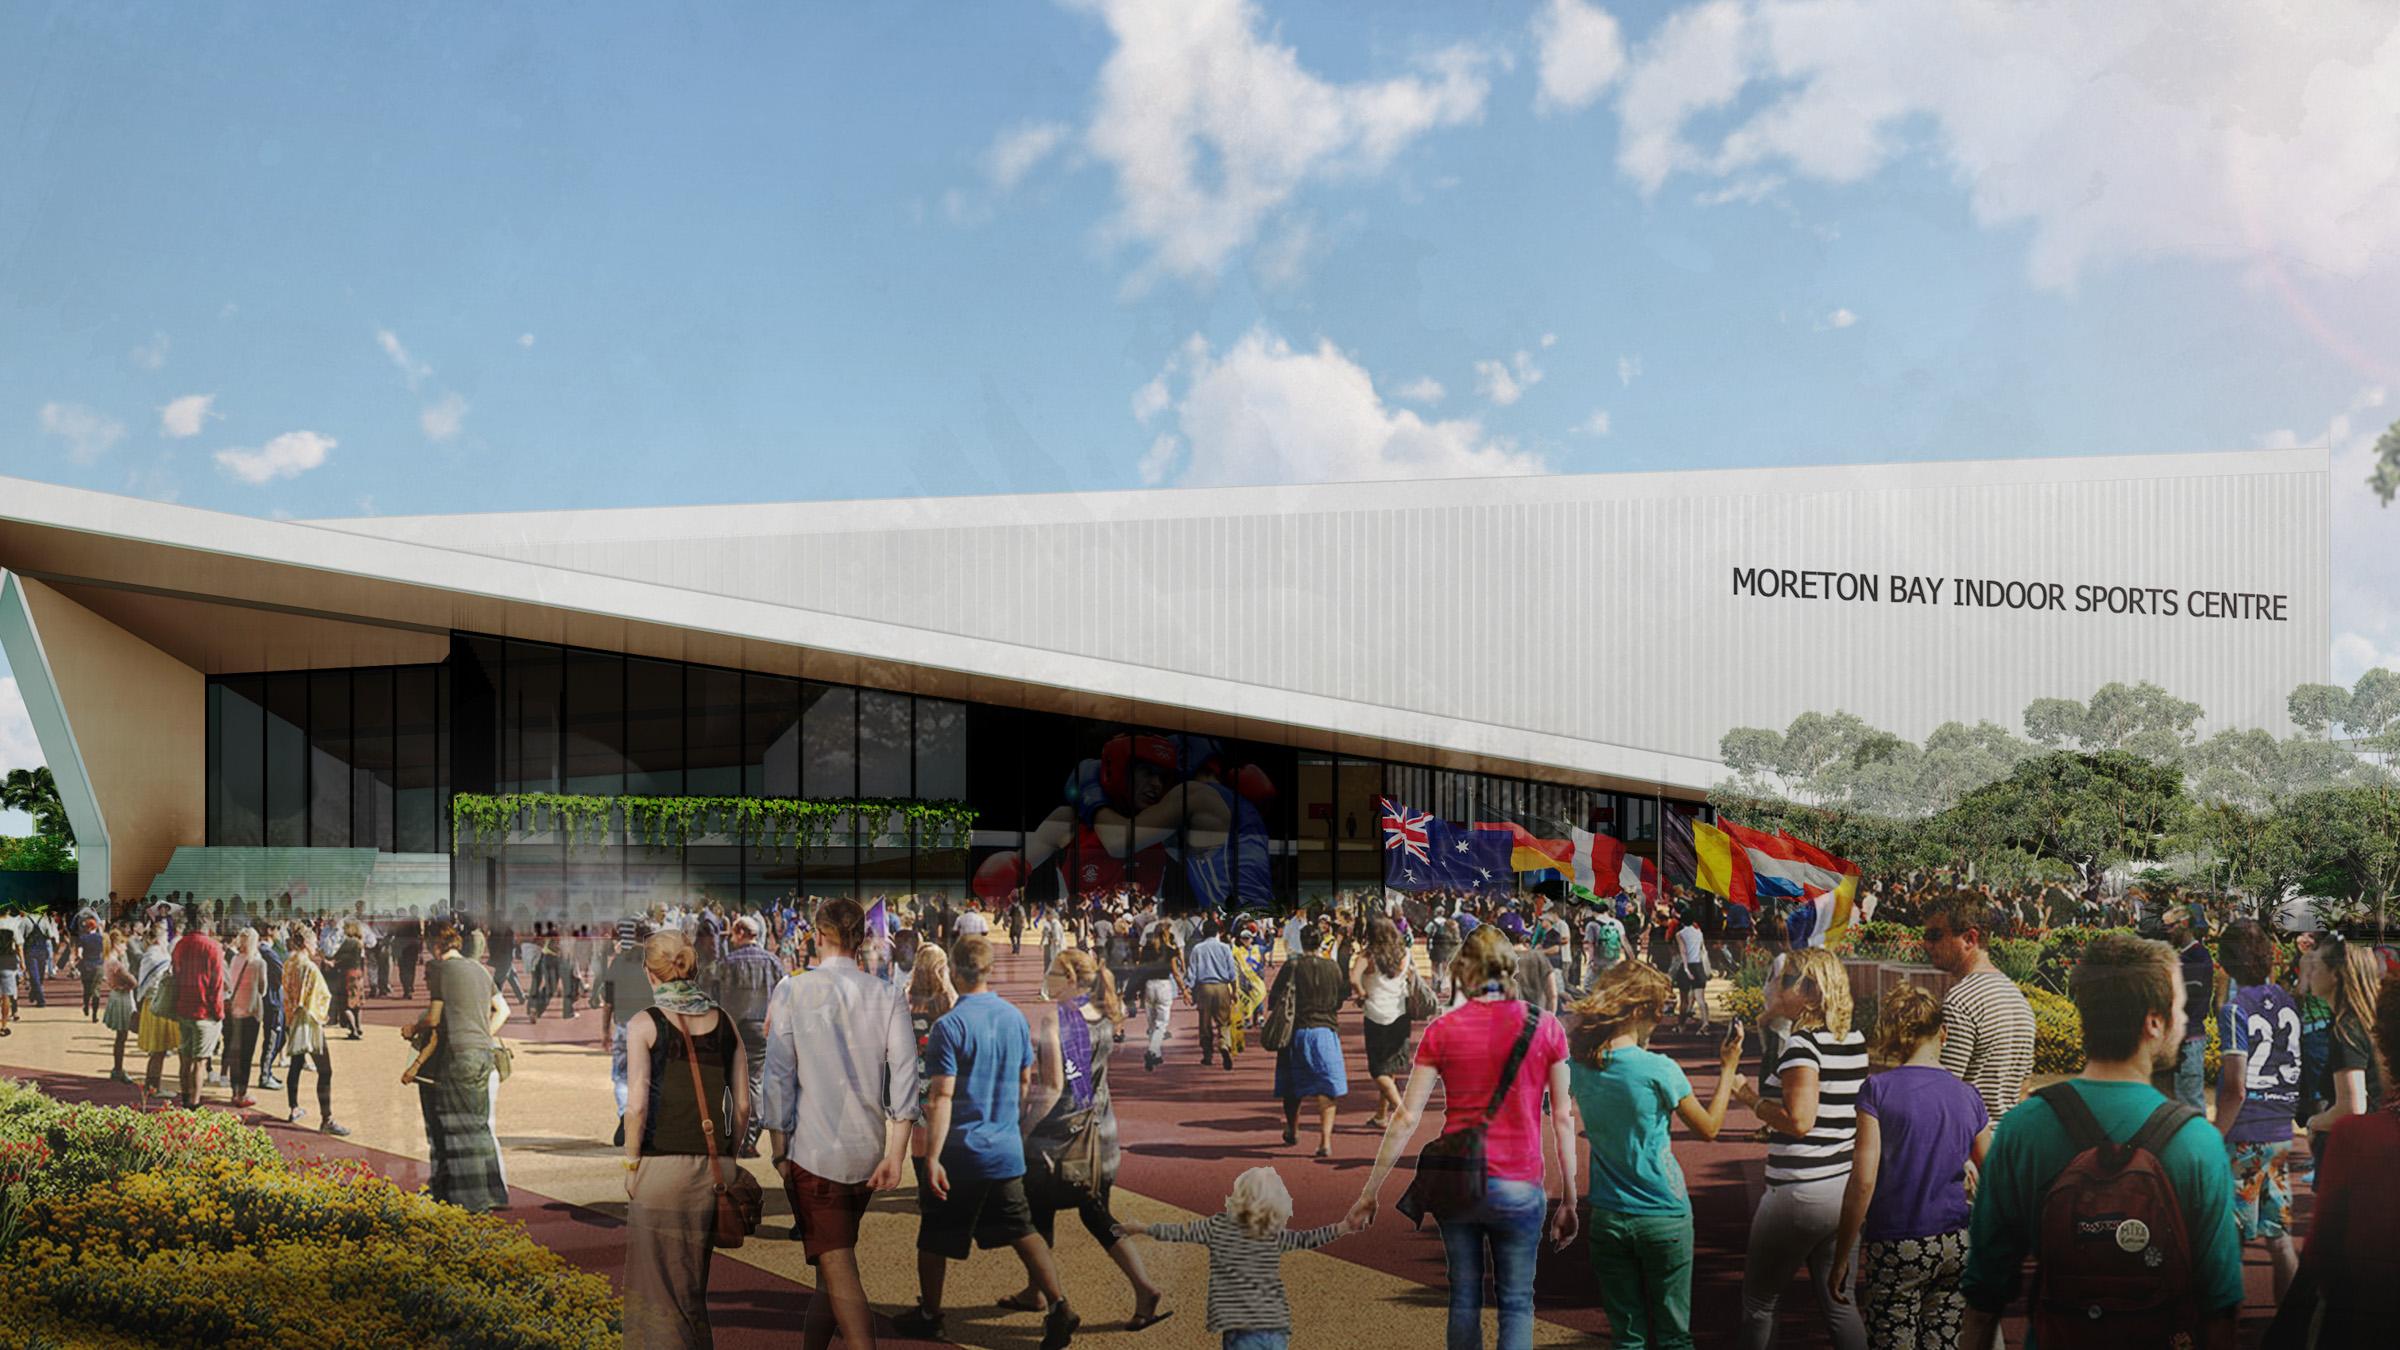 Computer-render of Moreton Bay Indoor sports centre decorated with flags, and crowds of people walking in